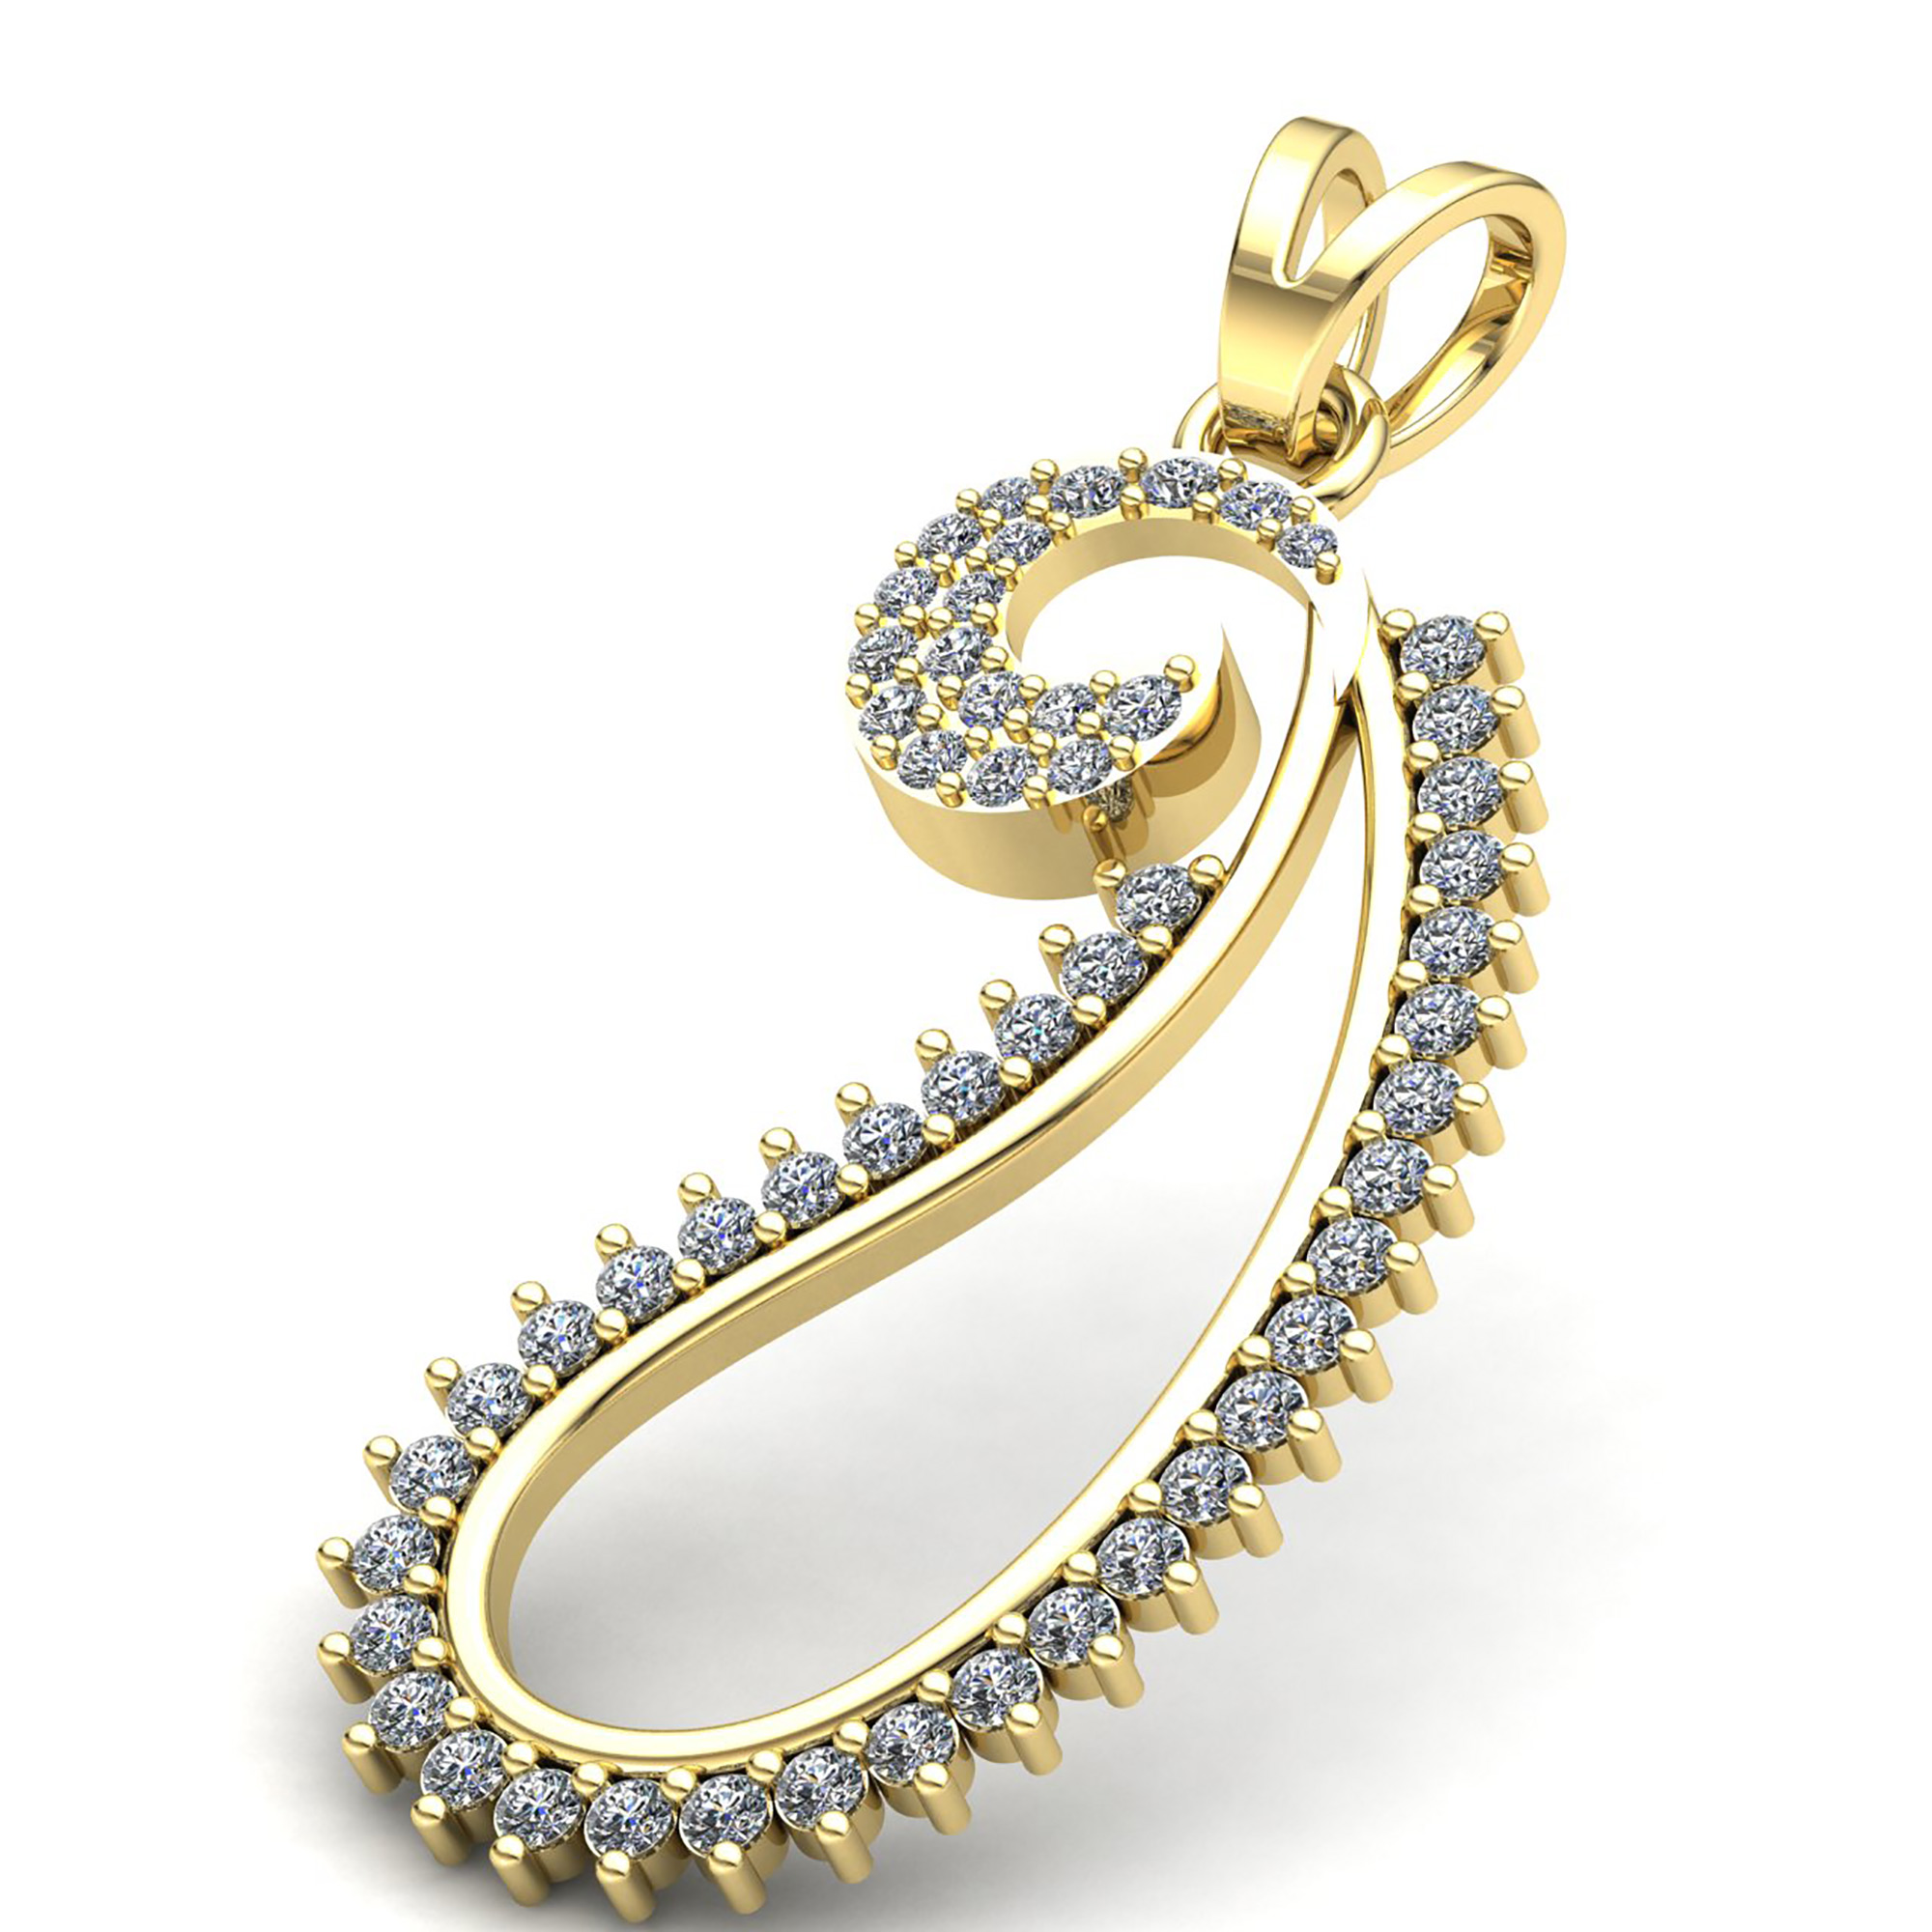 Jewel We Sell 1carat Round Cut Diamond Ladies Accent Pave Fancy Pendant Solid 10K Yellow Gold GH SI1